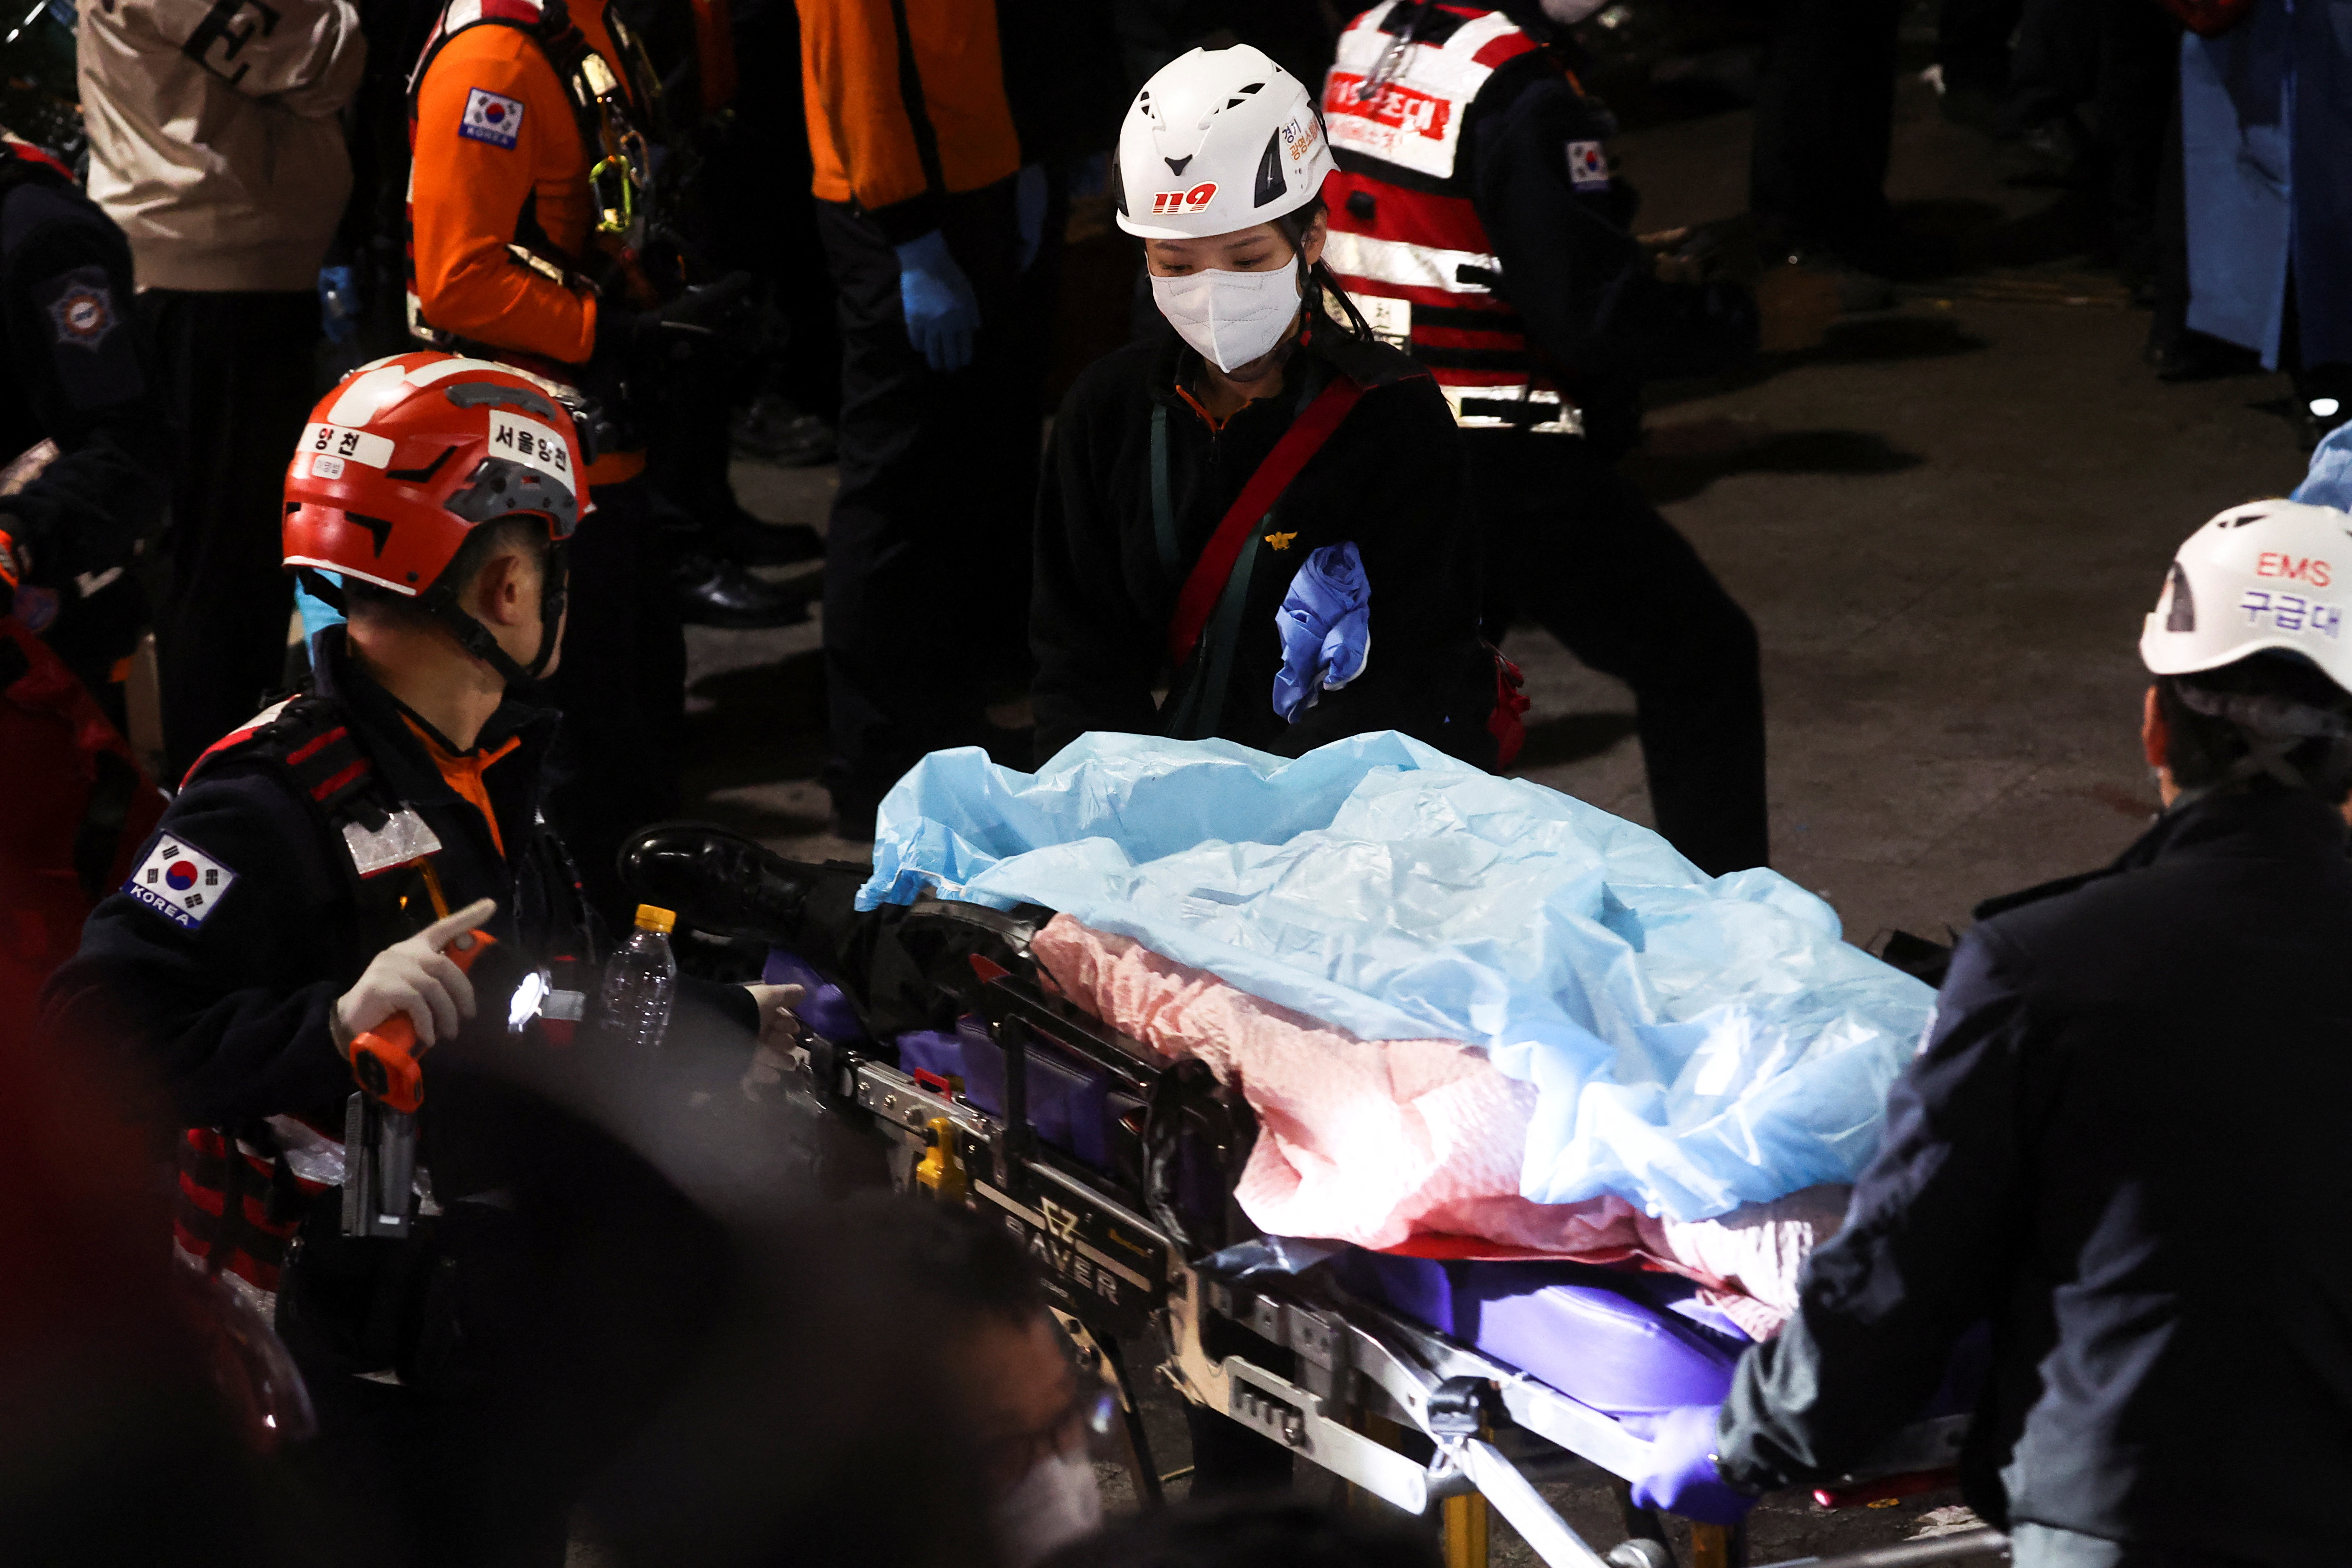 Television footage and photos from the scene showed ambulance vehicles lining the streets amid a heavy police presence and emergency workers carrying the injured on stretchers.